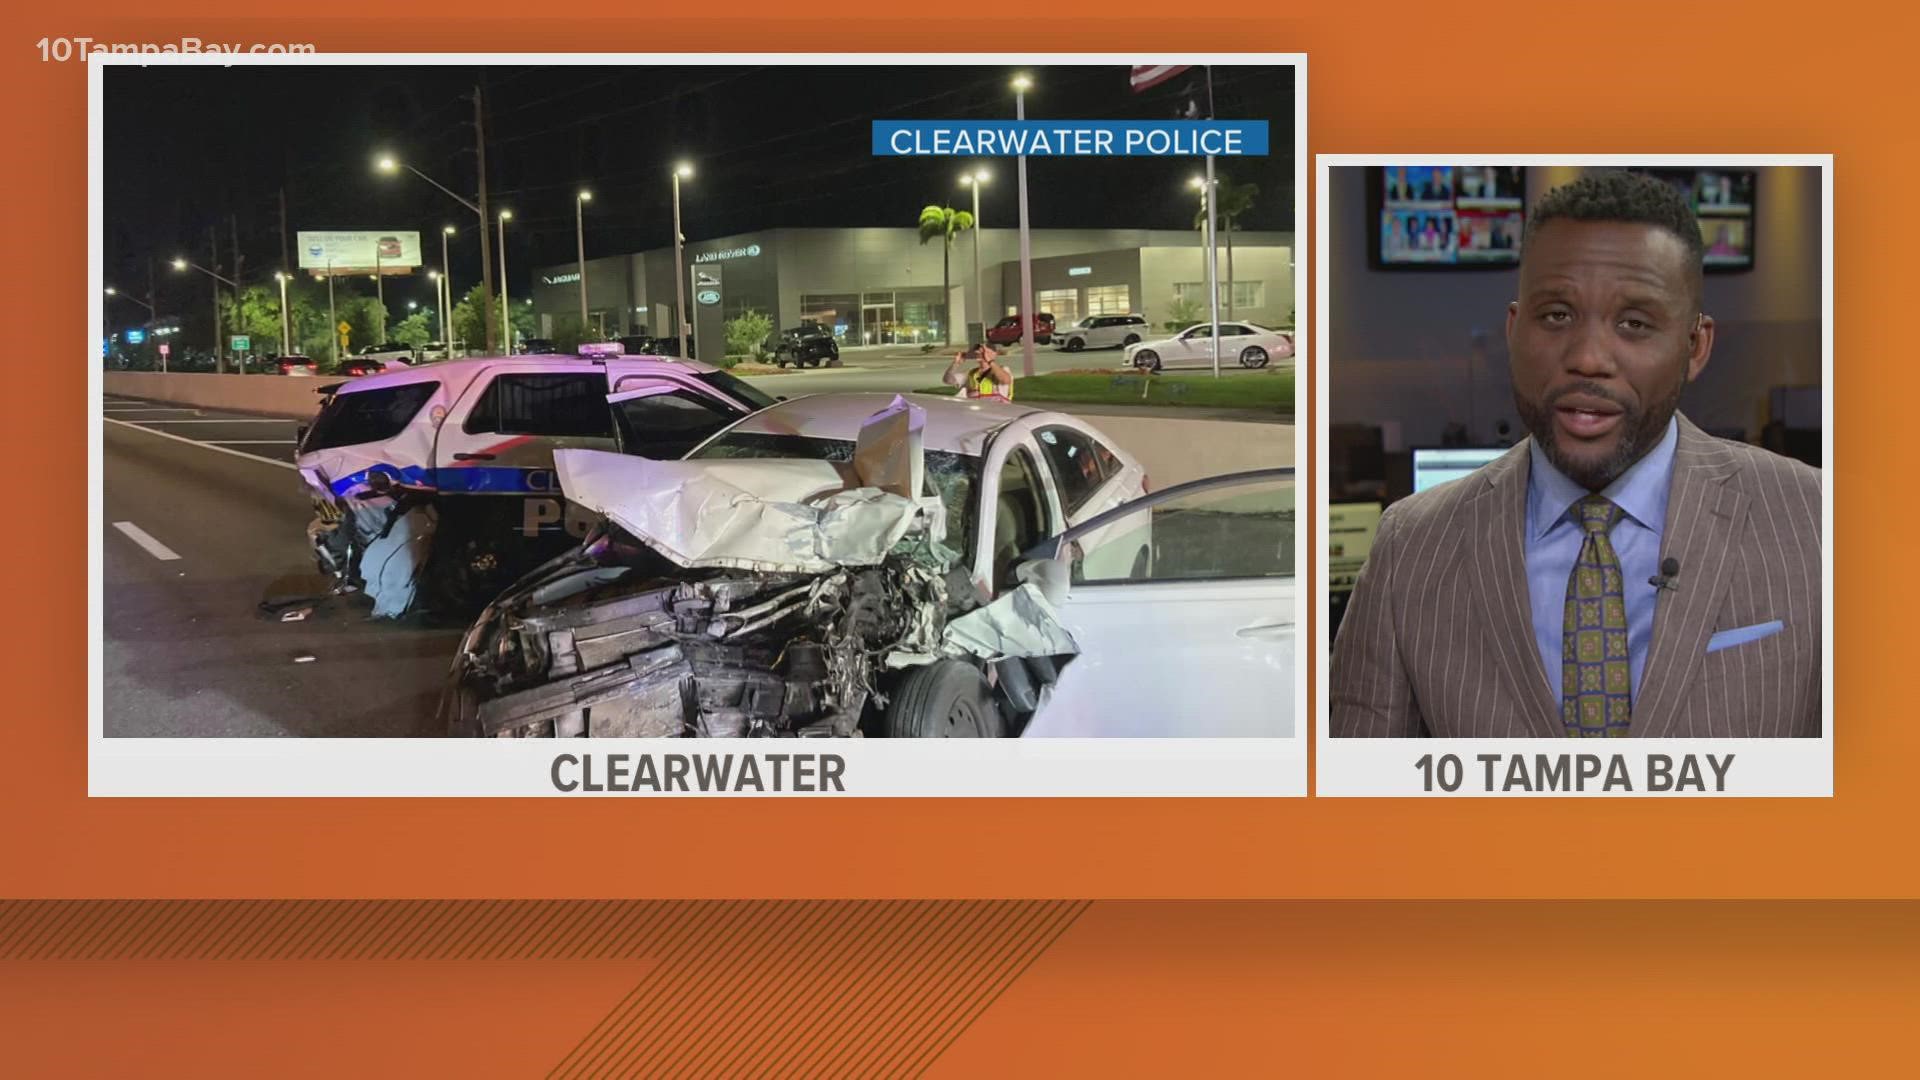 No officers were injured, the Clearwater Police Department explains.